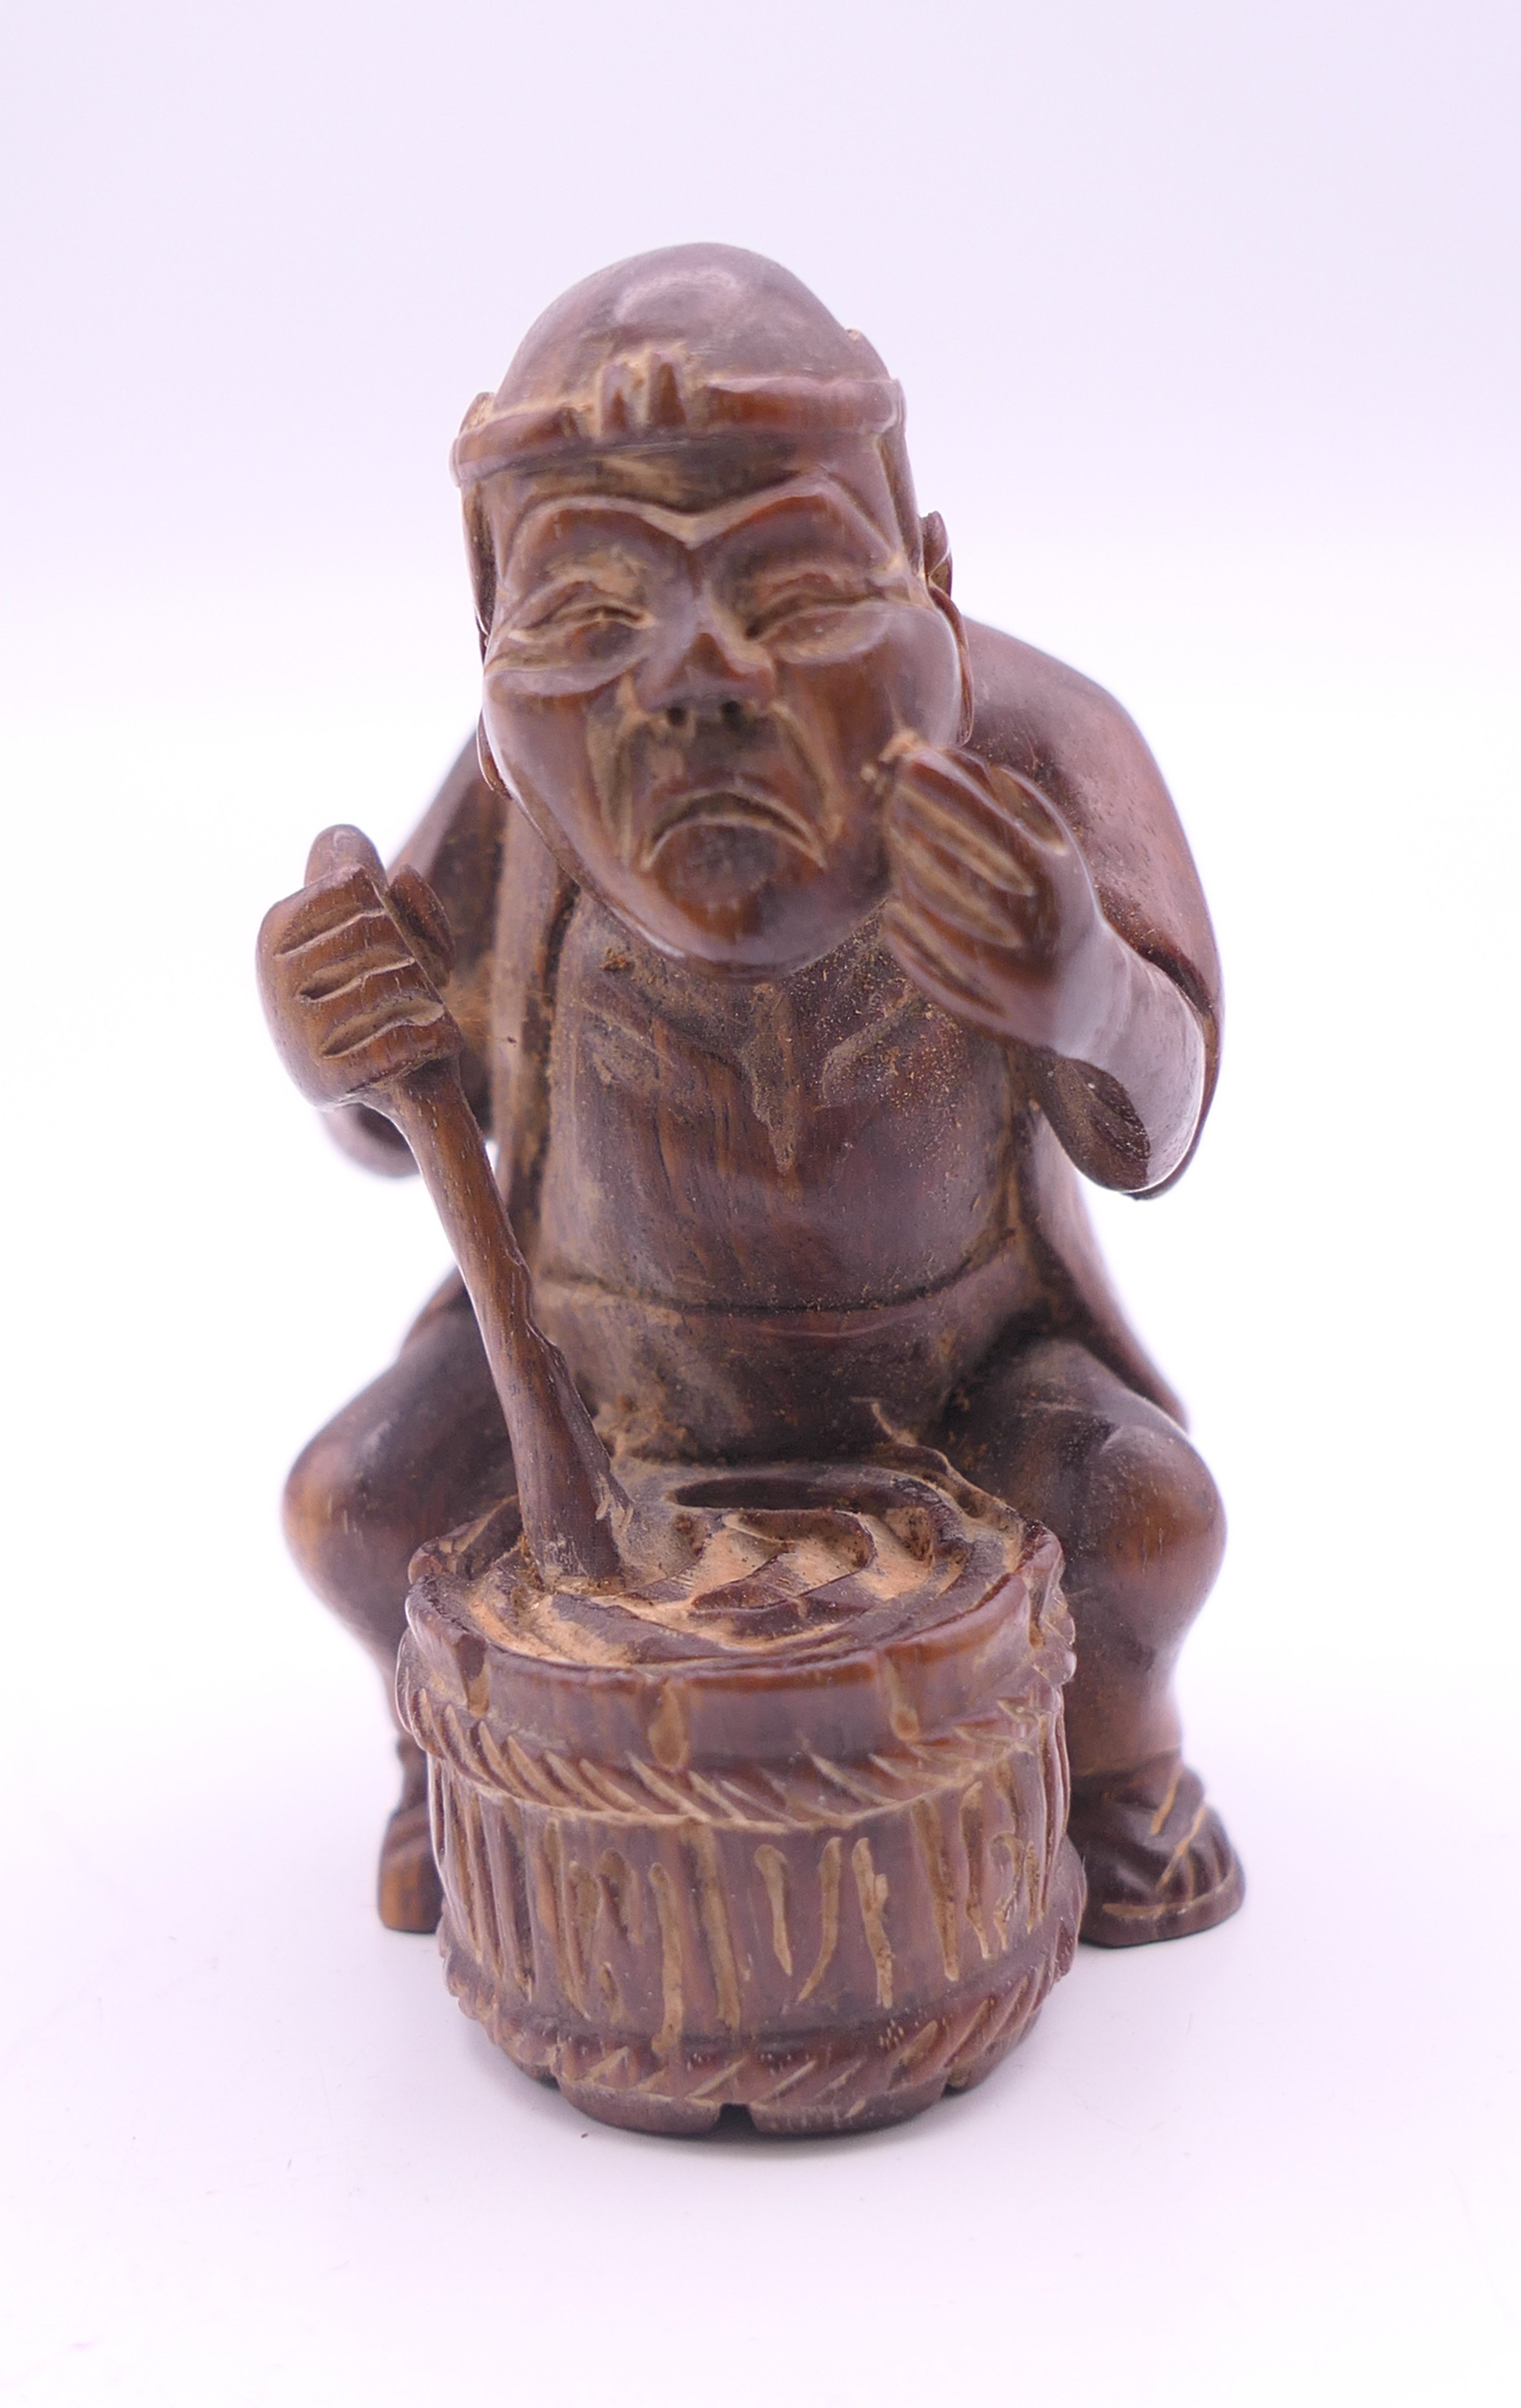 A netsuke formed as a man with a barrel. 6 cm high.